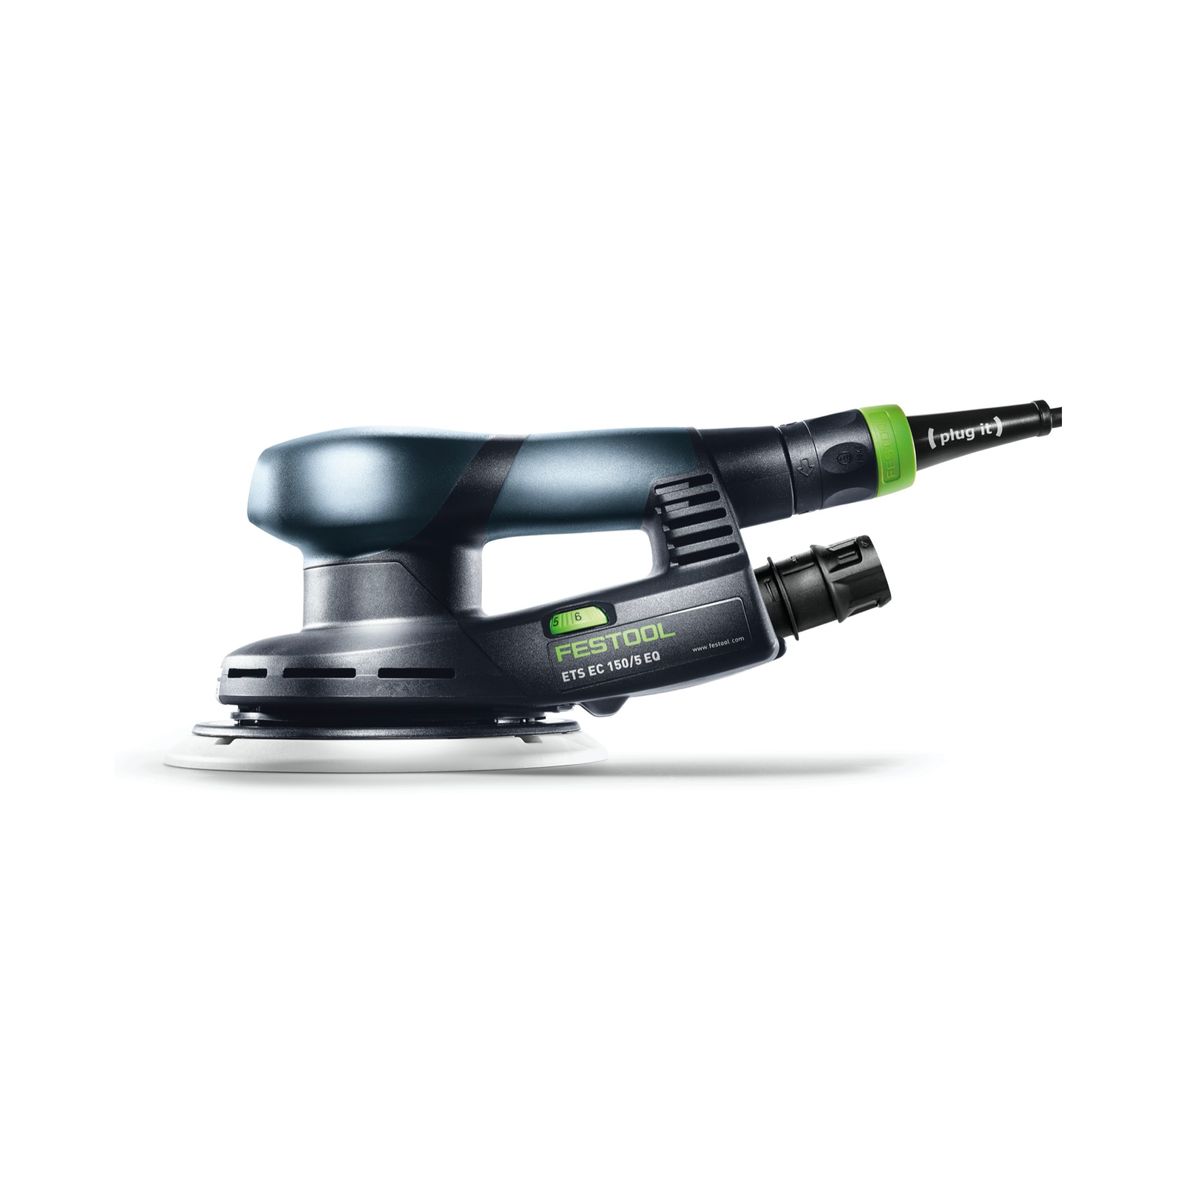 Festool ETS EC 150/5 EQ-Plus Exzenterschleifer 400 W 150 mm Brushless + 250x Schleifscheibe + 2x Protection Pad + Interface Pad + Schleifteller + systainer - Toolbrothers